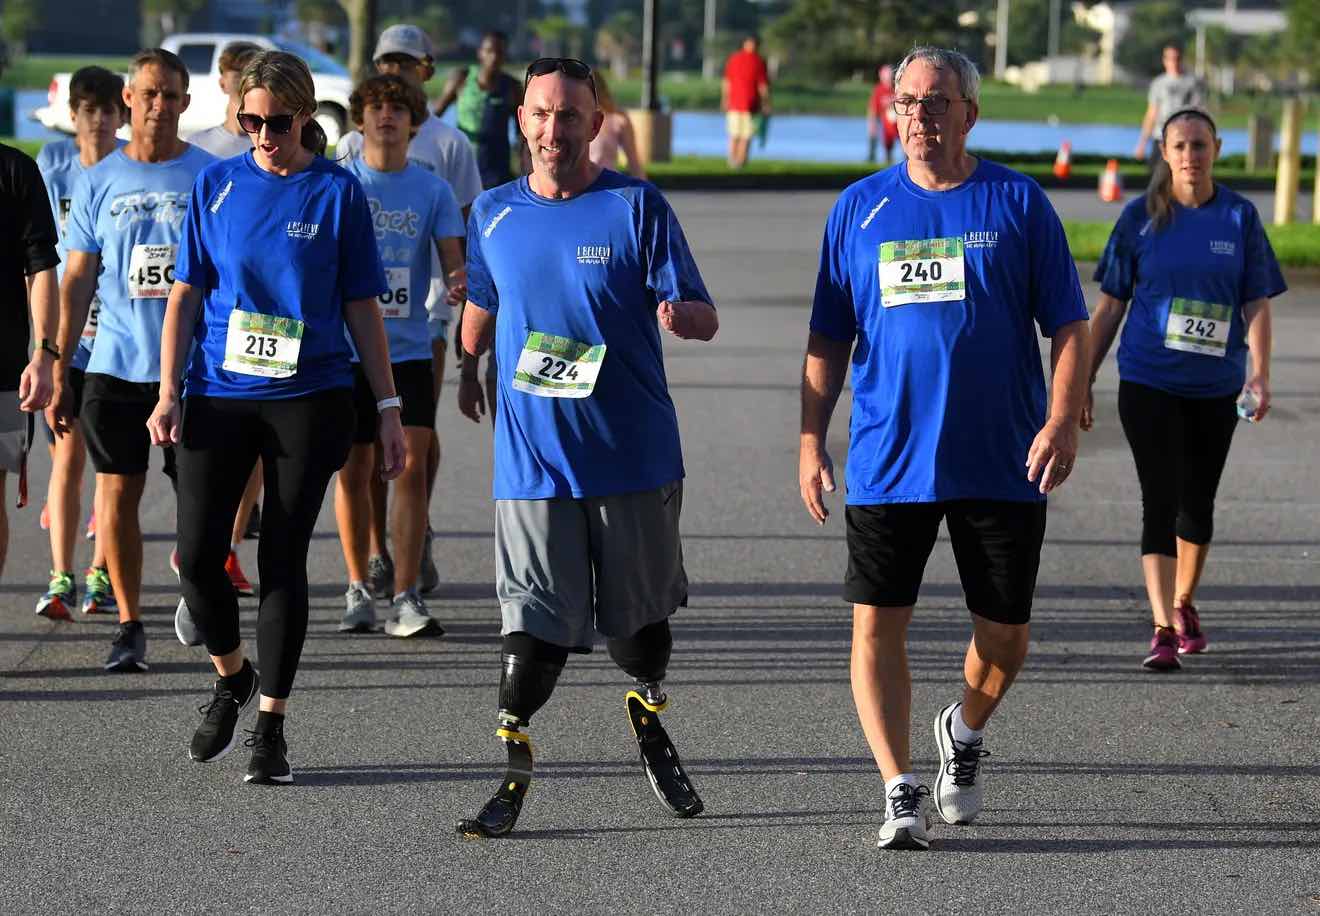 Quadruple Amputee Finishes Race With New Prostheses